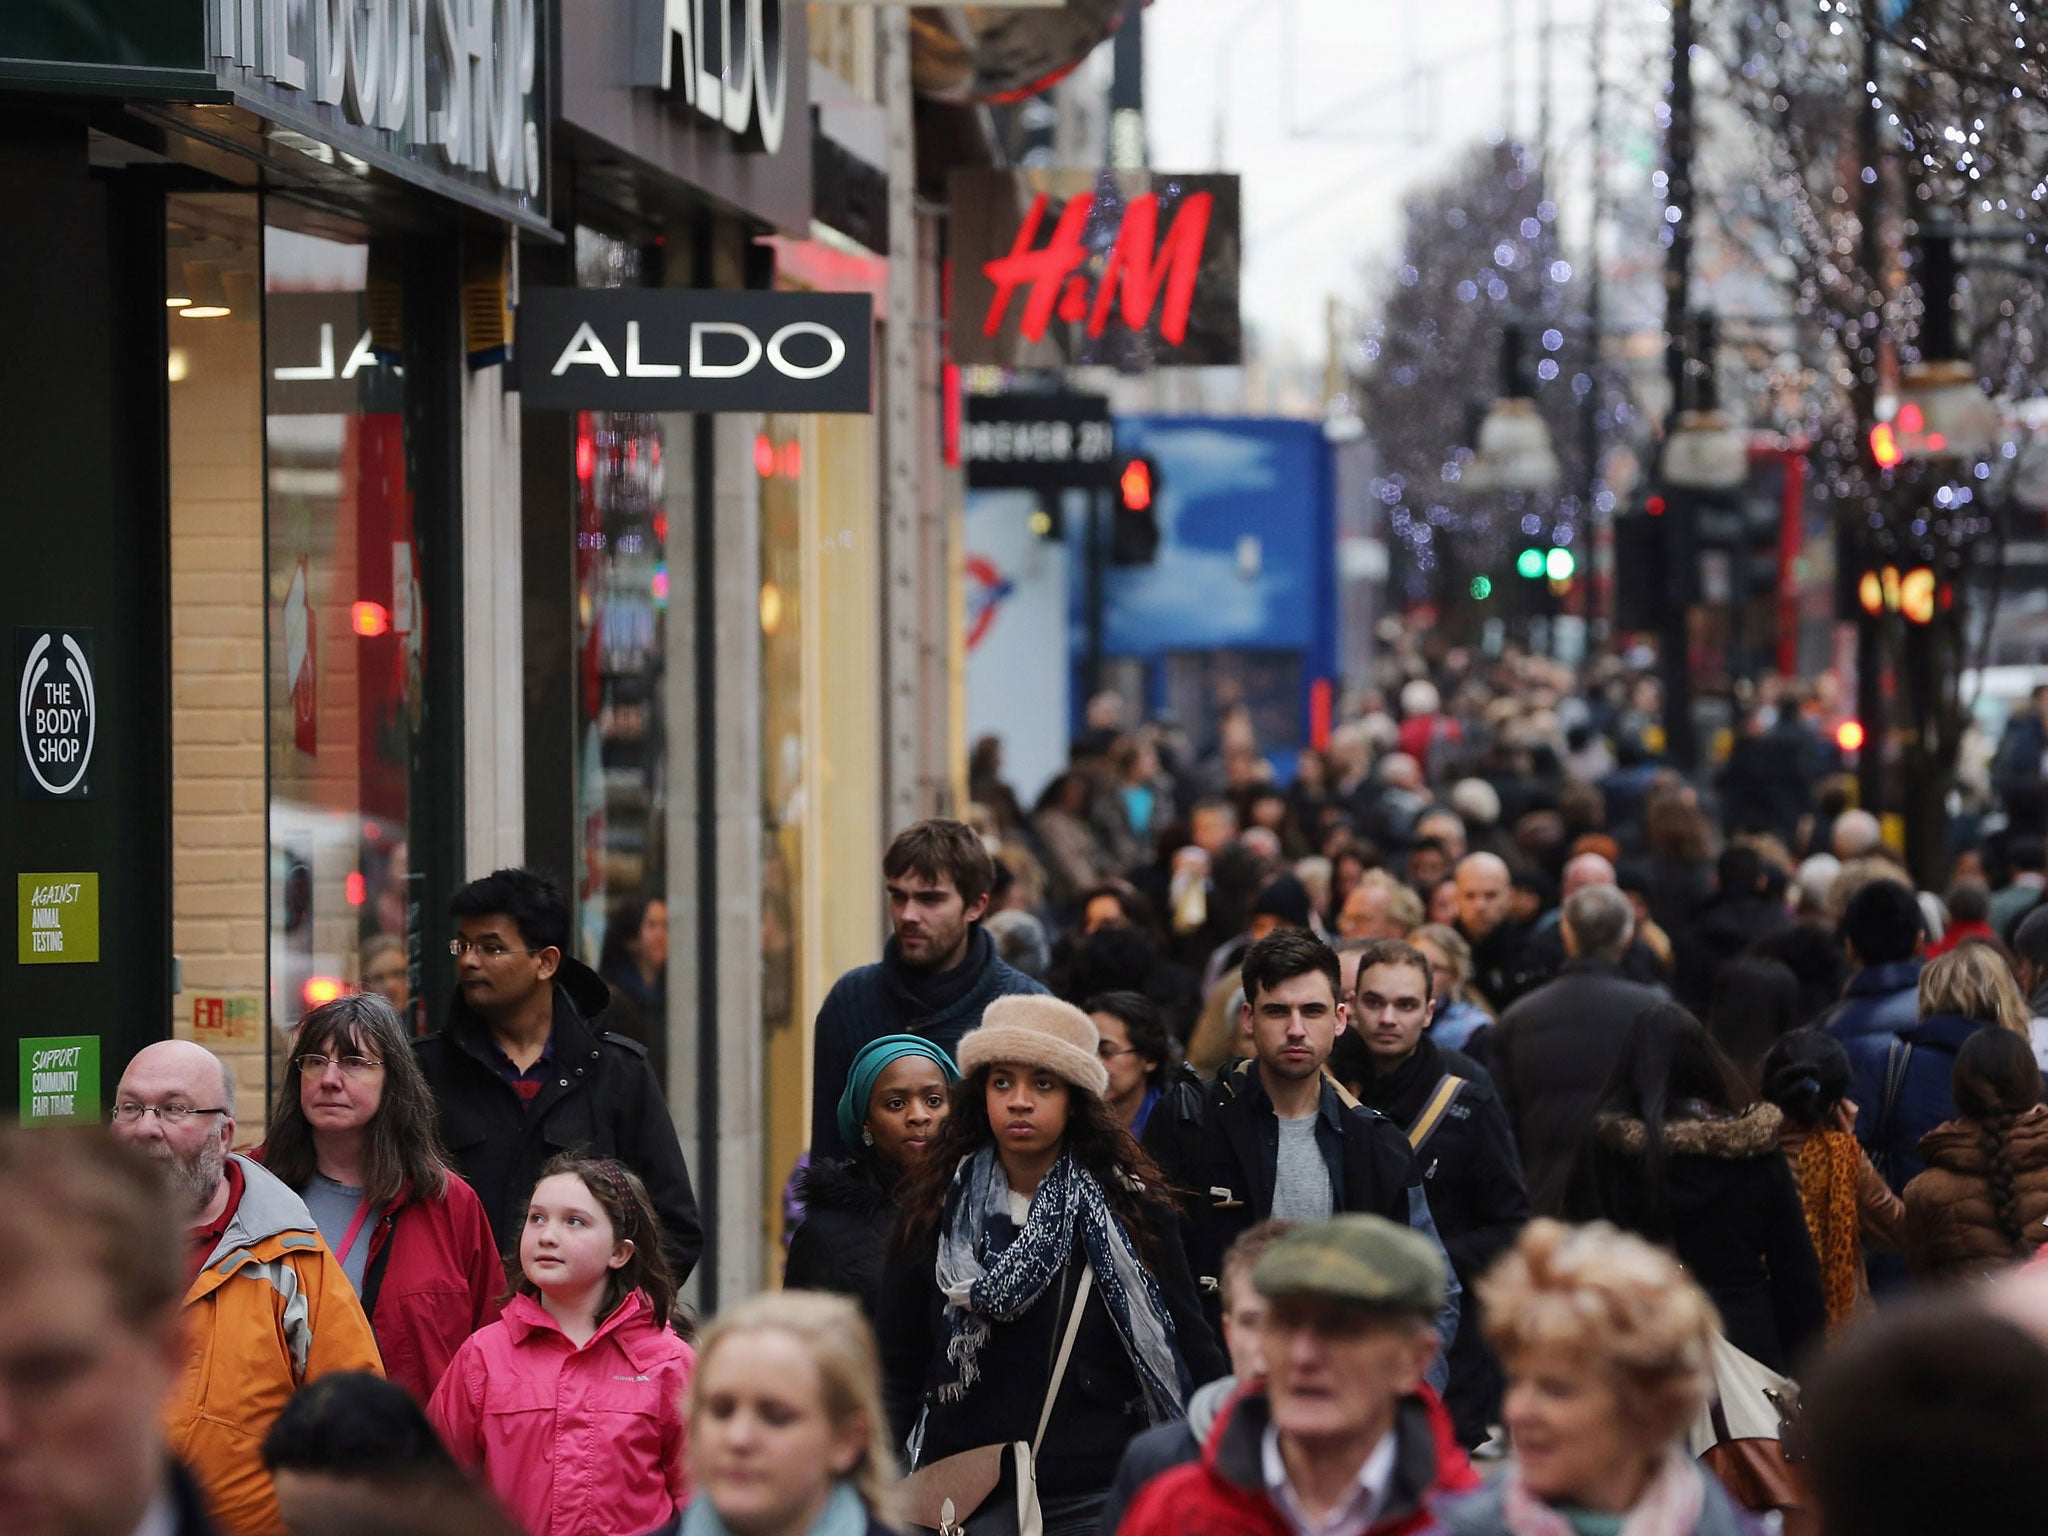 British economy to surpass pre-recession peak in 2014 driven by surge in household spending